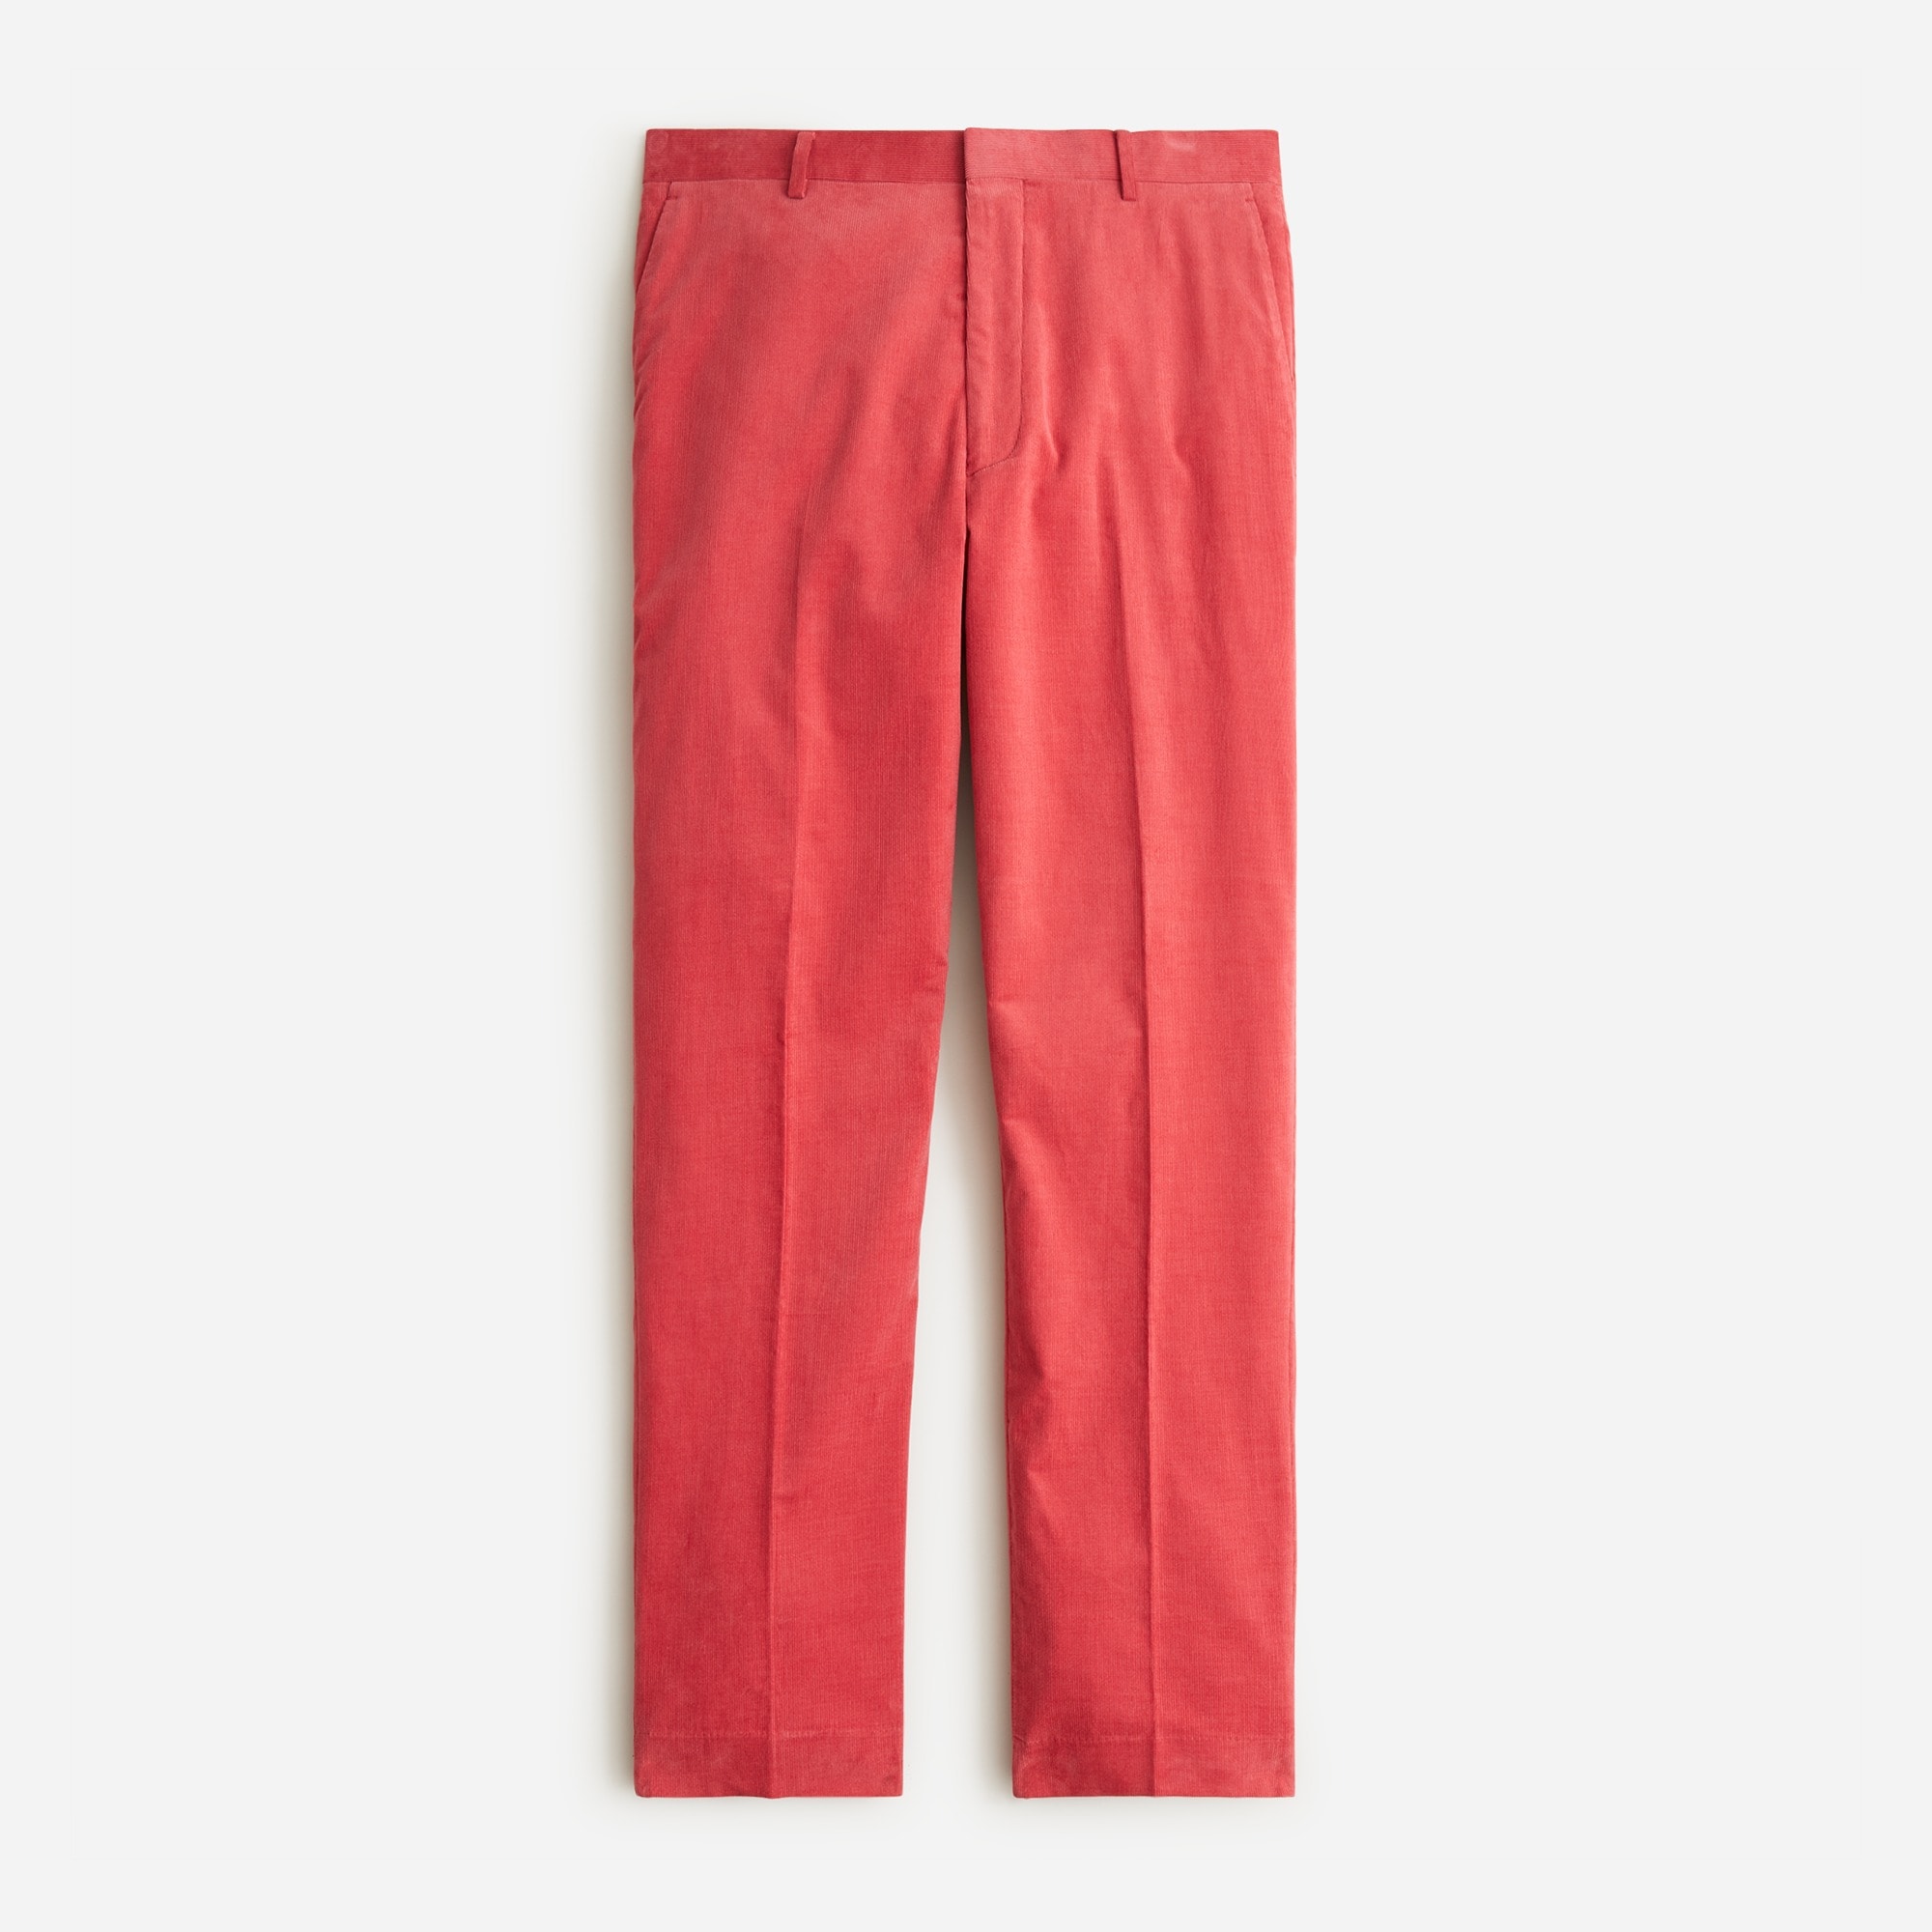  Kenmare Relaxed-fit suit pant in Italian cotton corduroy